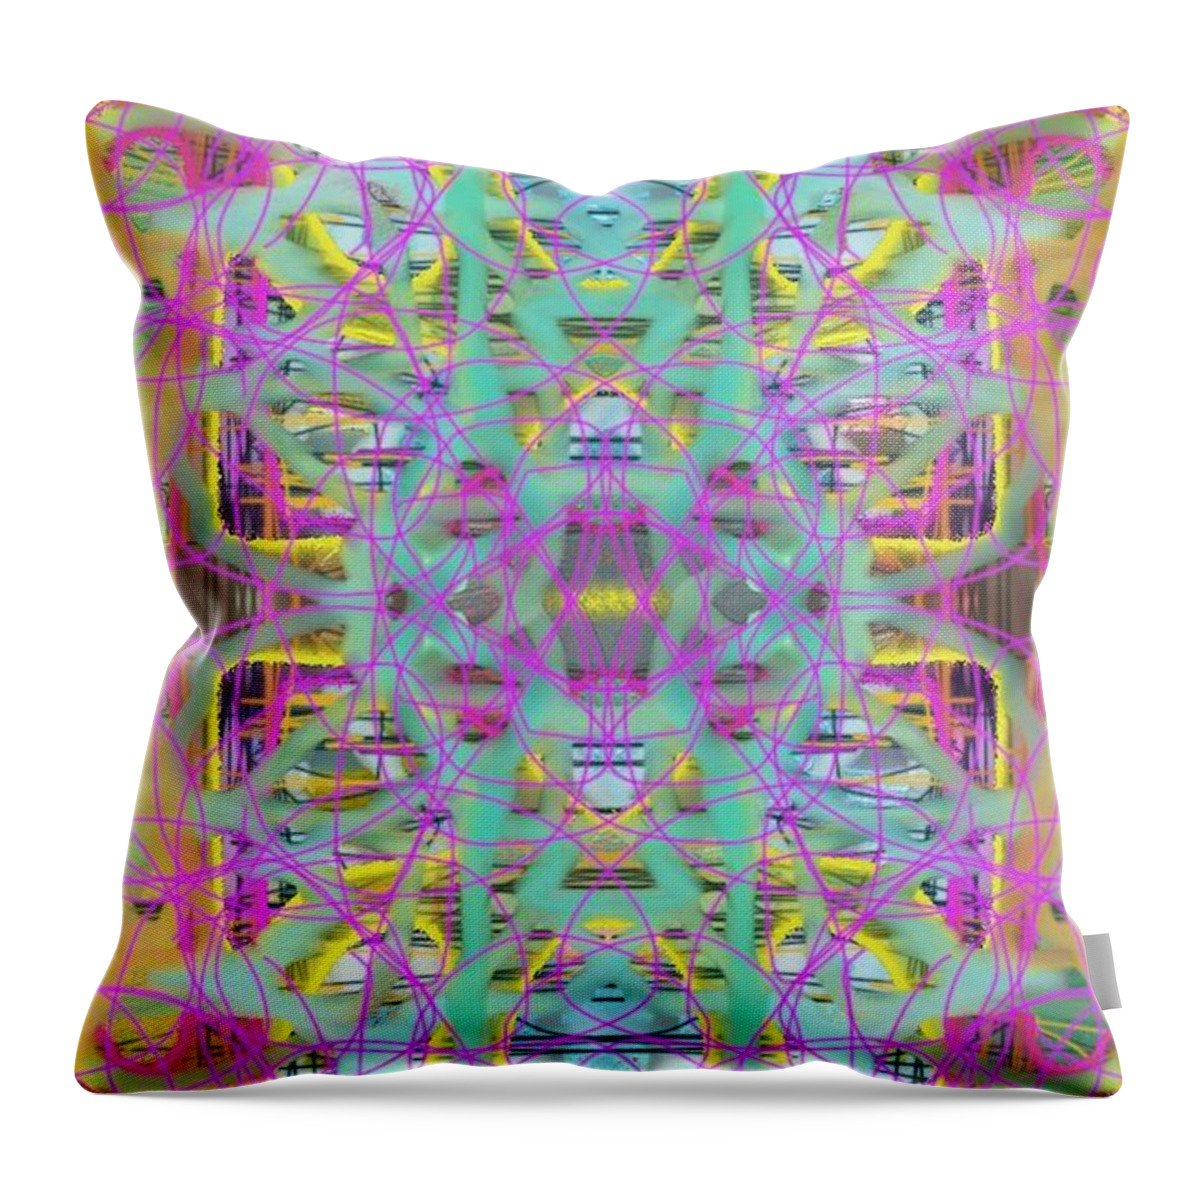 Indigenous-inspired Throw Pillow featuring the painting Phantagism by Naomi Jacobs